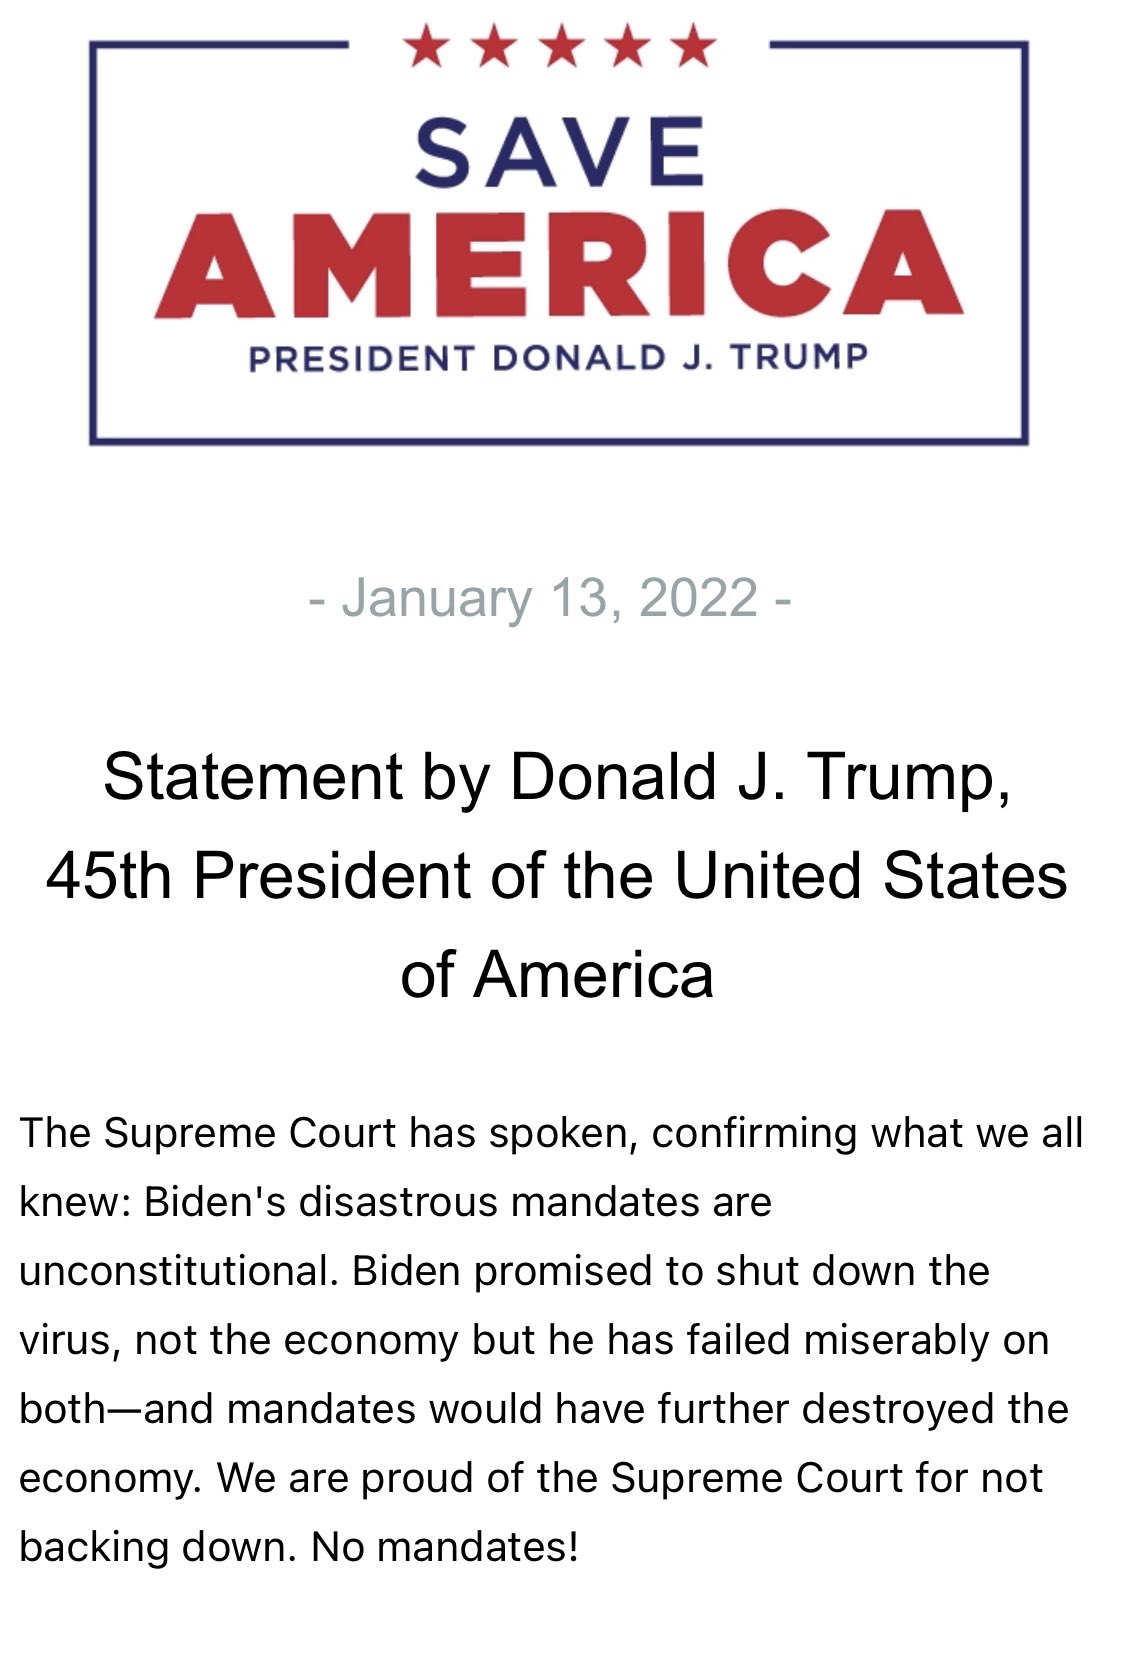 TRUMP STATEMENT: â€œThe Supreme Court has spoken, confirming what we all knew: Biden's disastrous mandates are unconstitutional. Biden promised to shut down the virus, not the economy but he has failed miserably on bothâ€”and mandates would have further destroyed the economy.â€